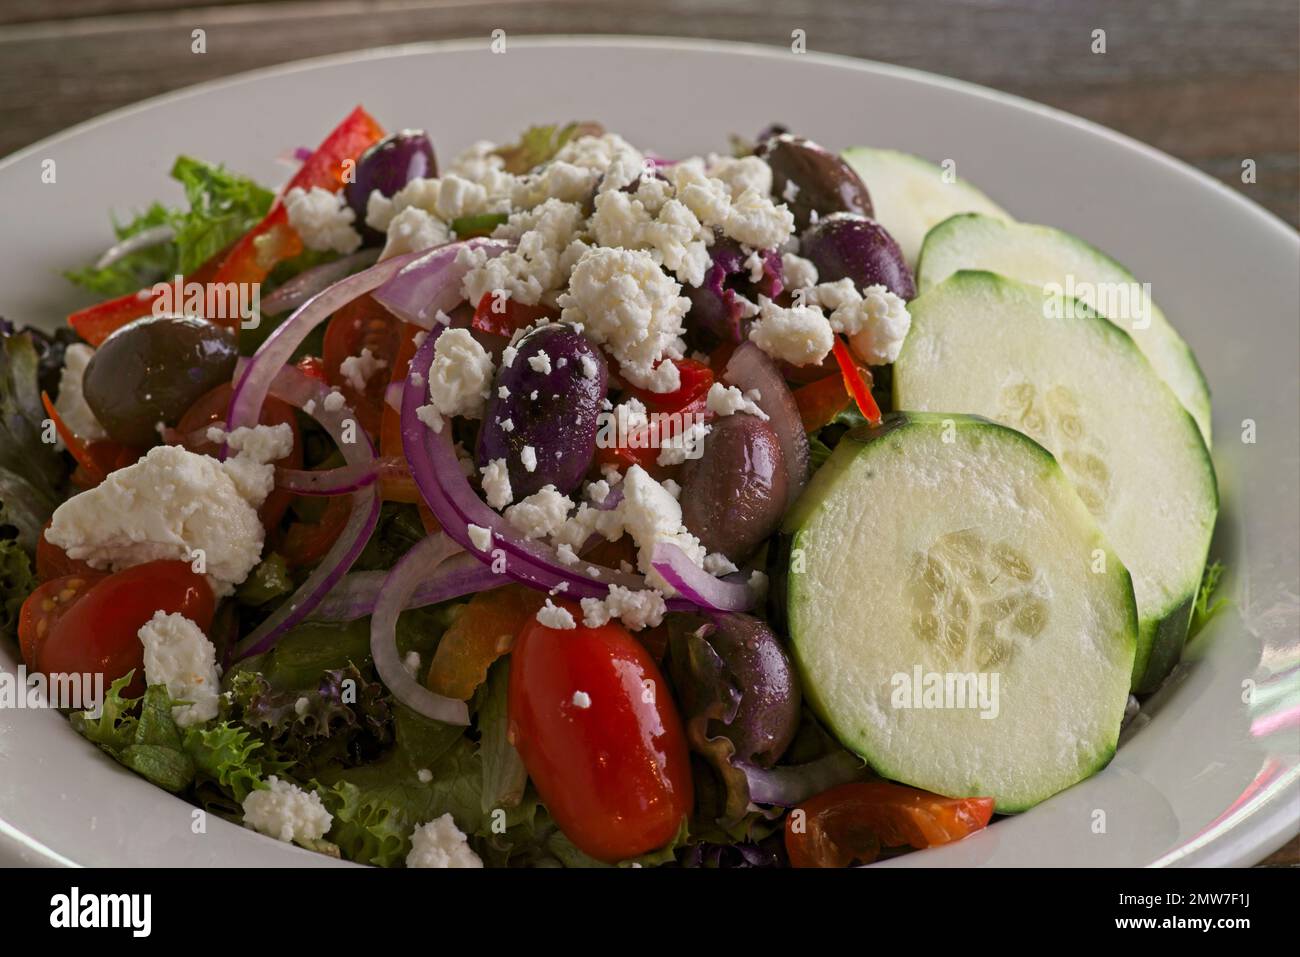 Greek salad with cucumber, cherry tomatoes, feta cheese, red onions, kalamata olives, and crisp lettuce, in a white bowl with dramatic side lighting Stock Photo